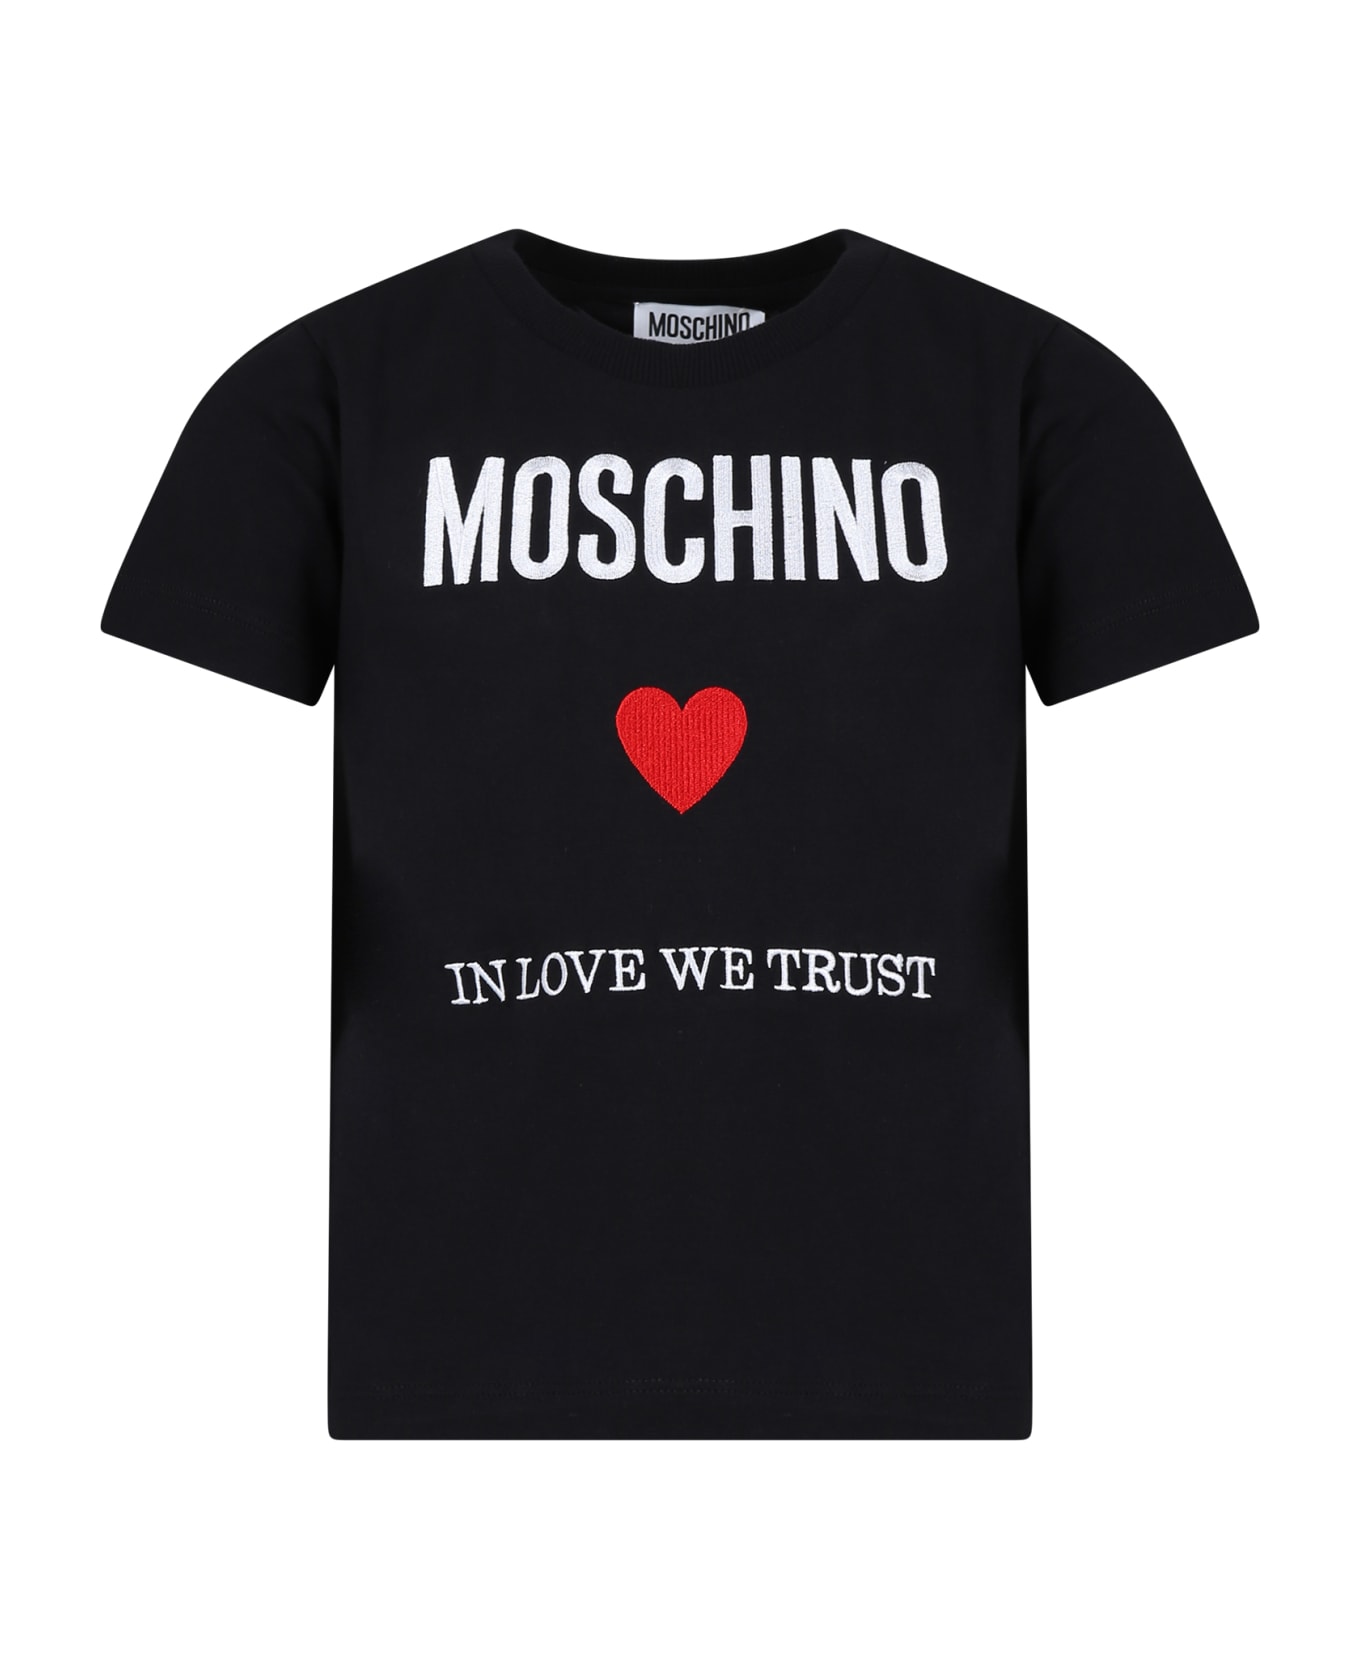 Moschino Black T-shirt For Girl With Logo And Red Heart - Black